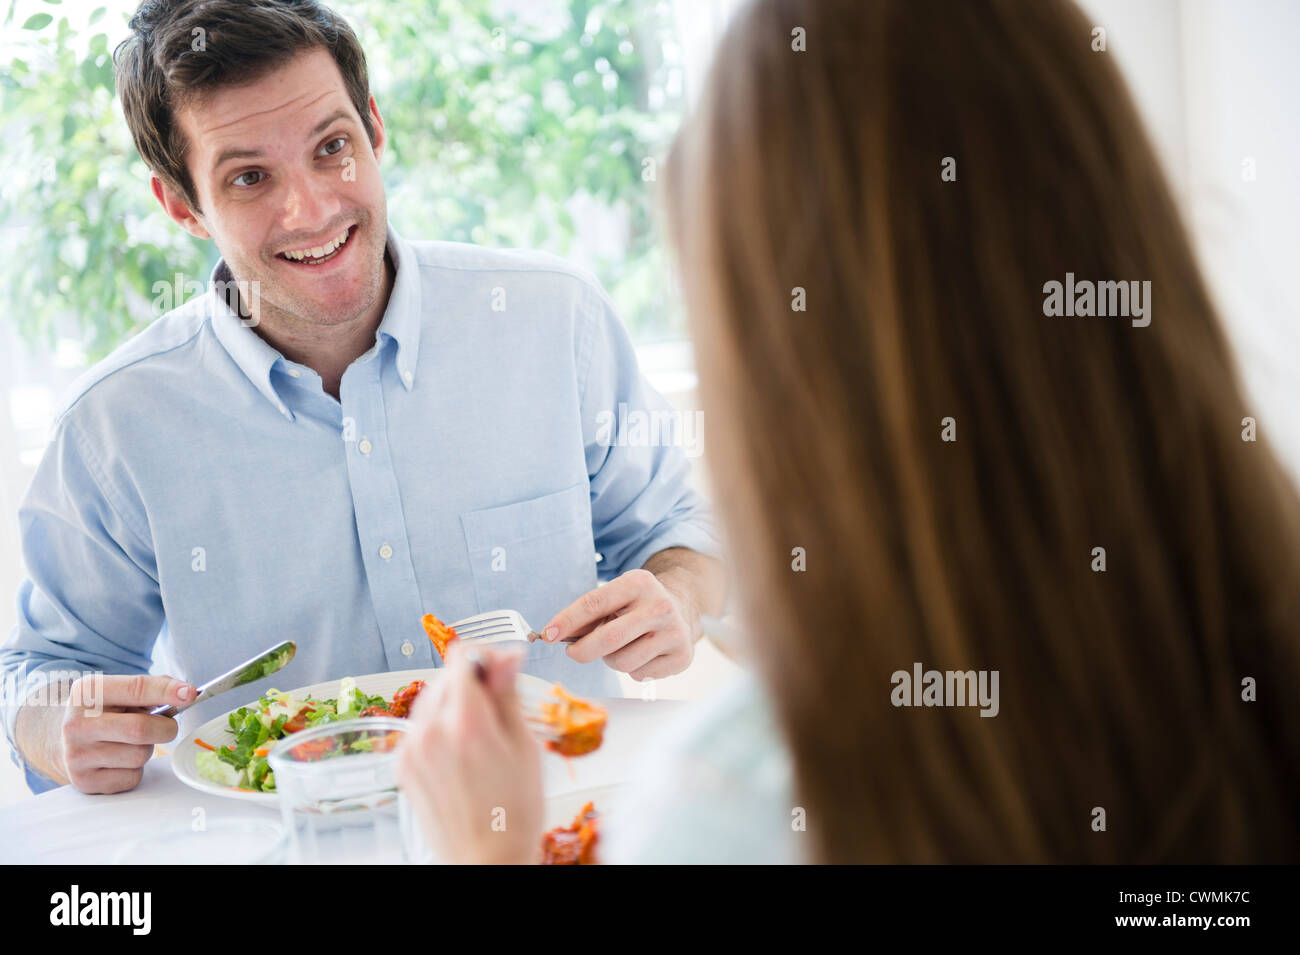 USA, New Jersey, Jersey City, Happy young couple eating together Stock Photo